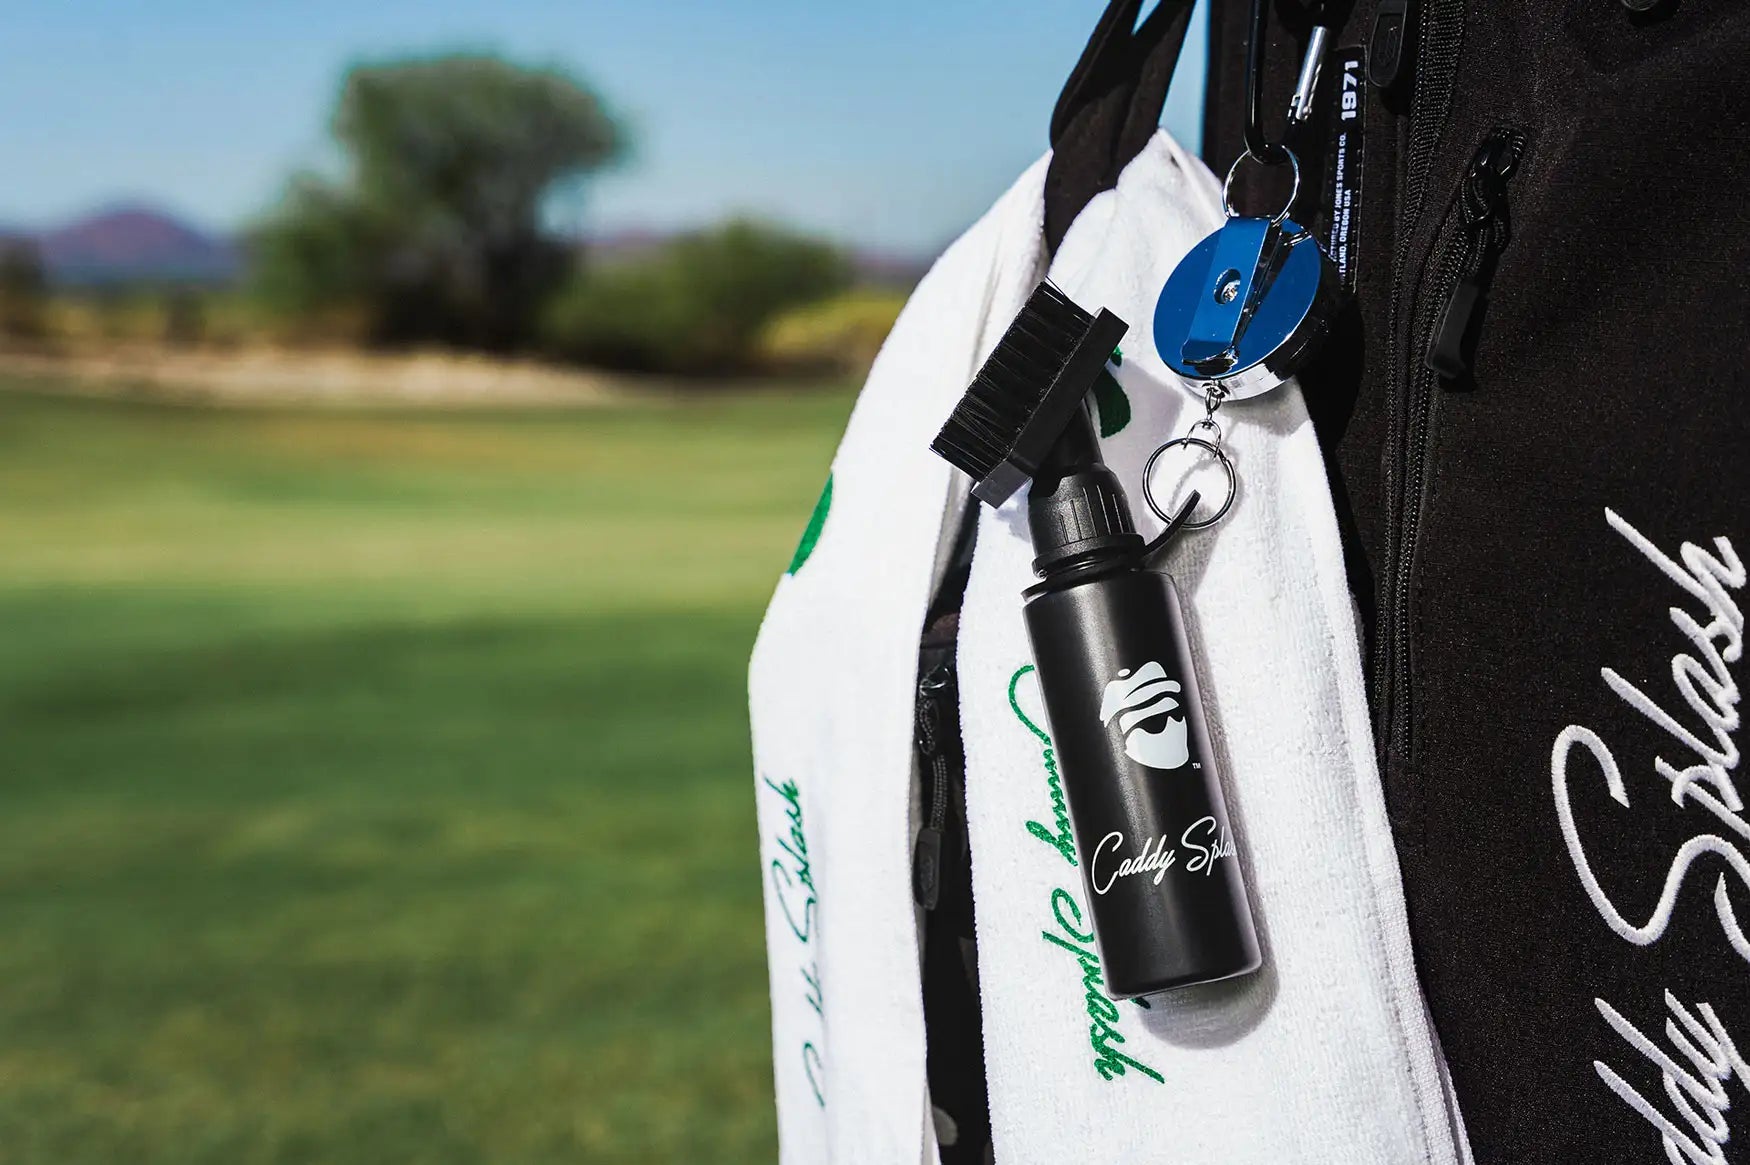 Caddy Splash Golf Cleaning Brush attached to golf Bag with Caddy Splash Cleaning Towel